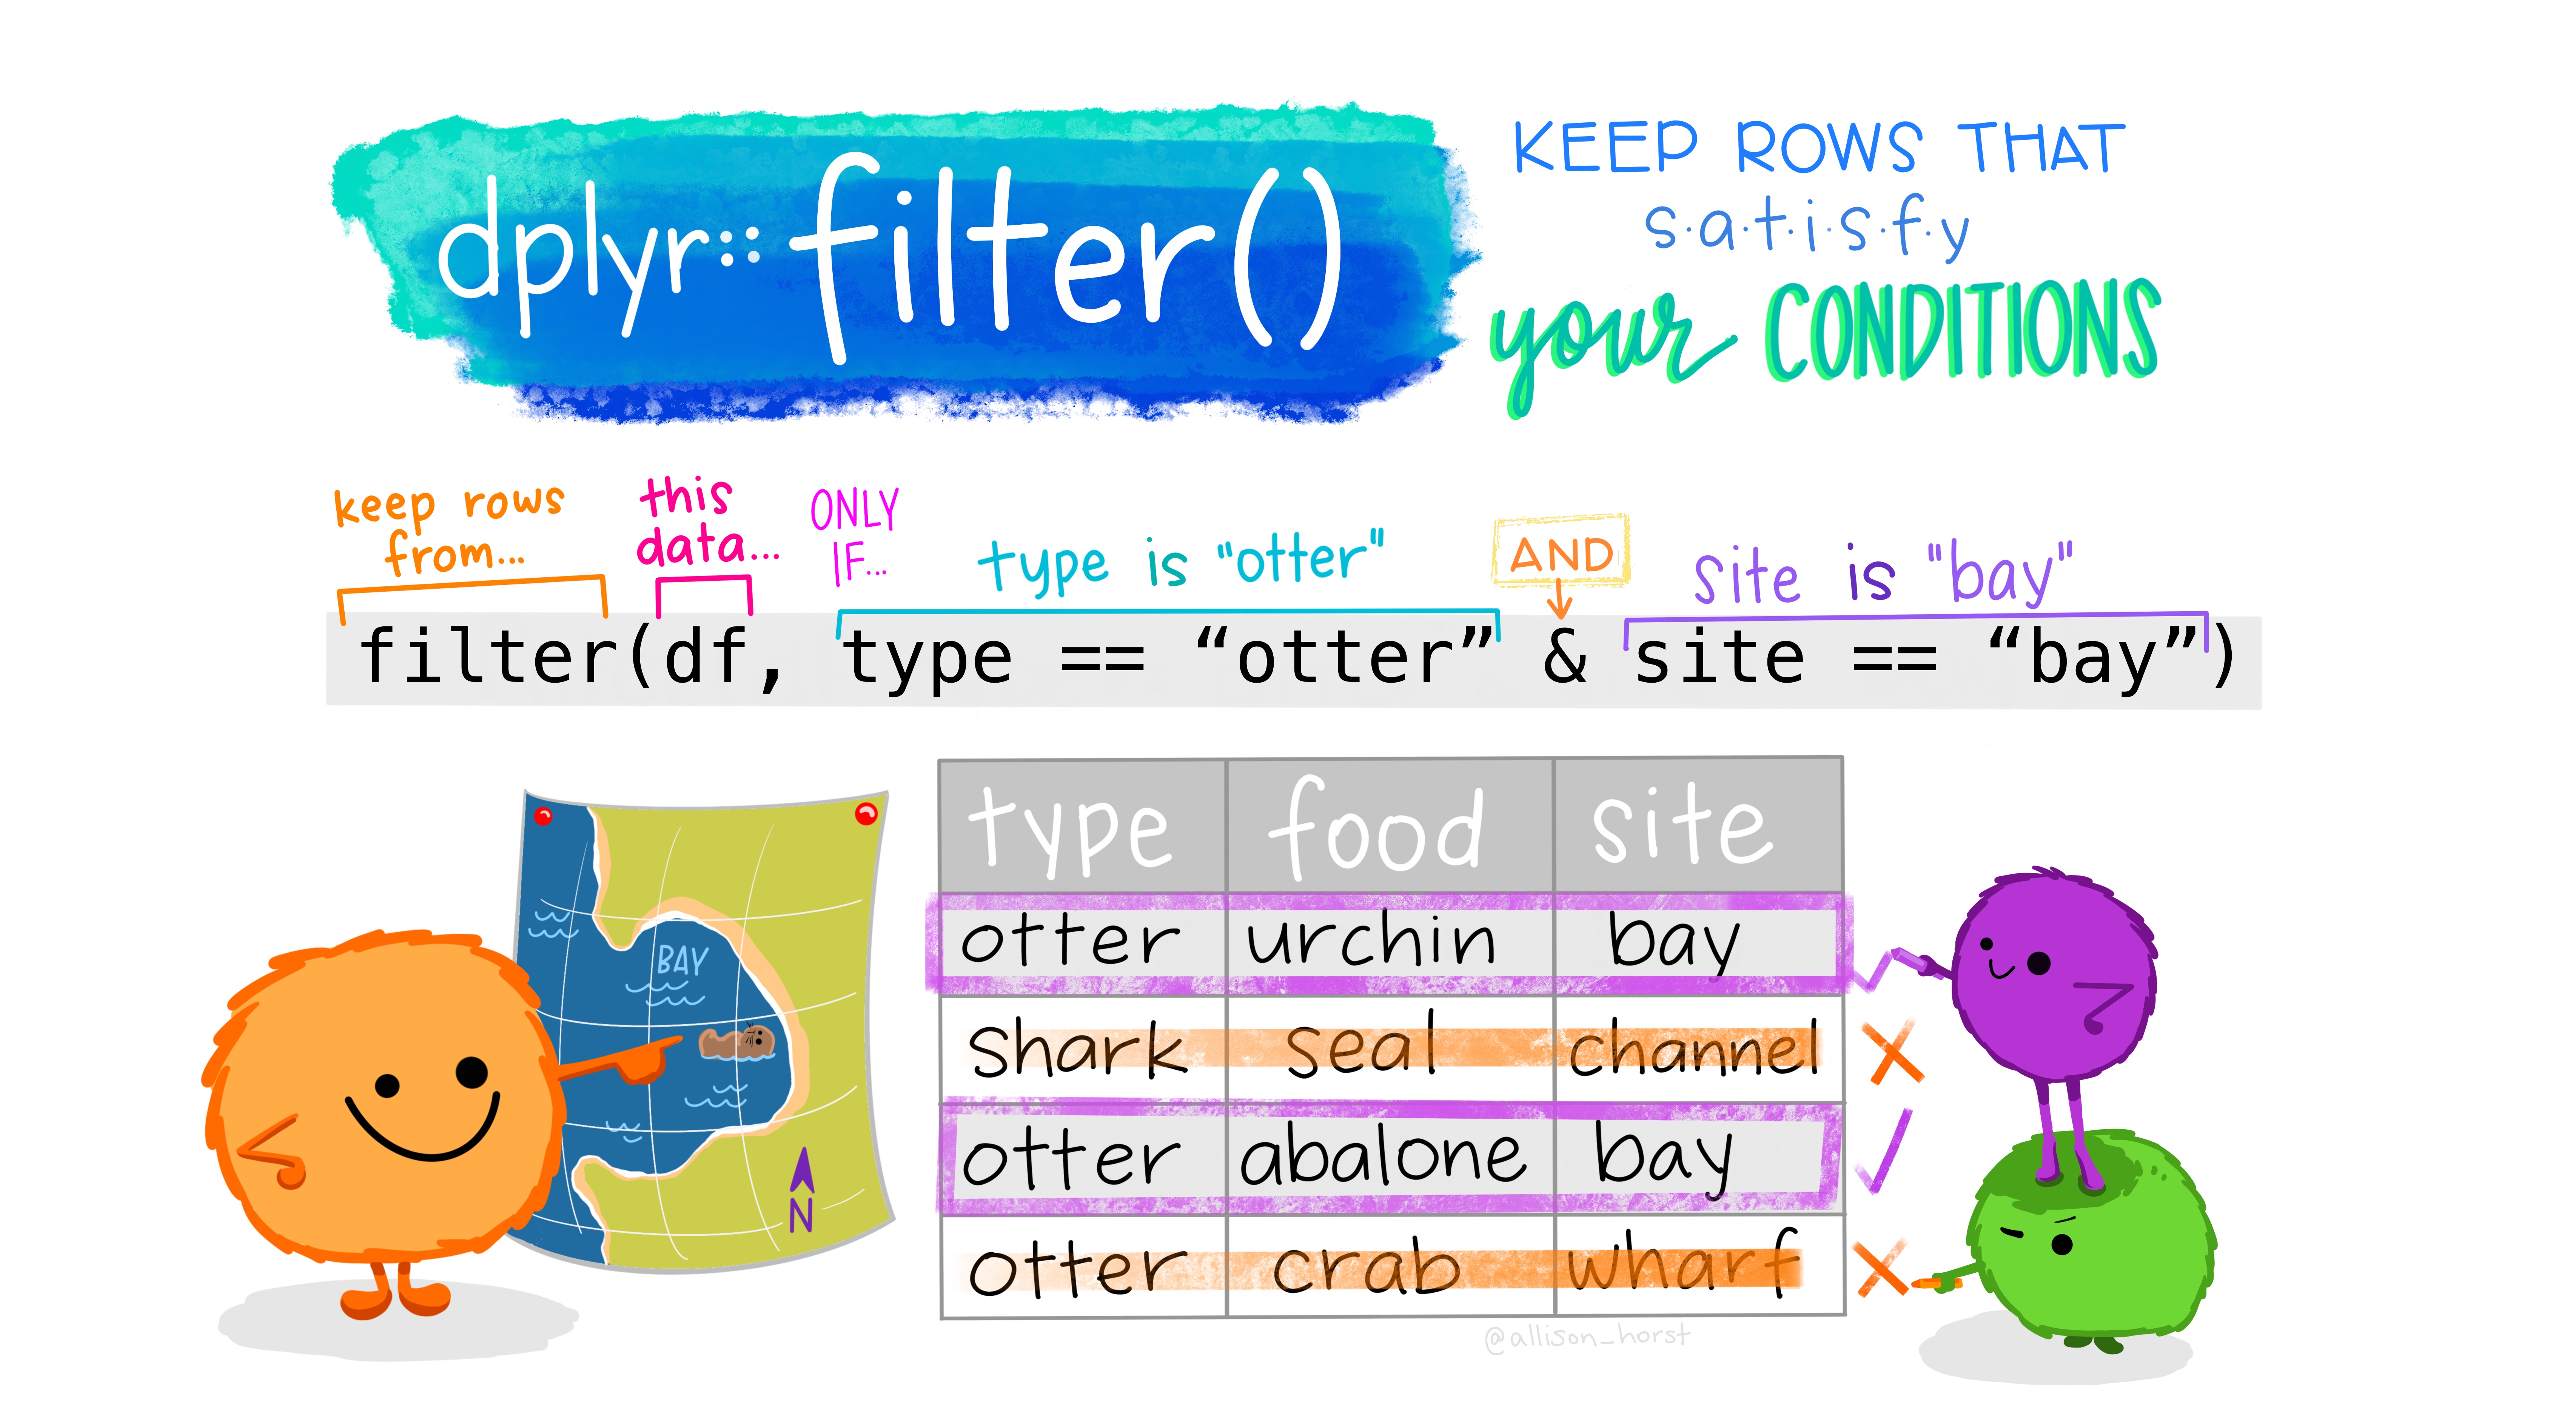 dplyr::filter() example. Source: [Allison Horst data science and stats illustrations](https://github.com/allisonhorst/stats-illustrations)